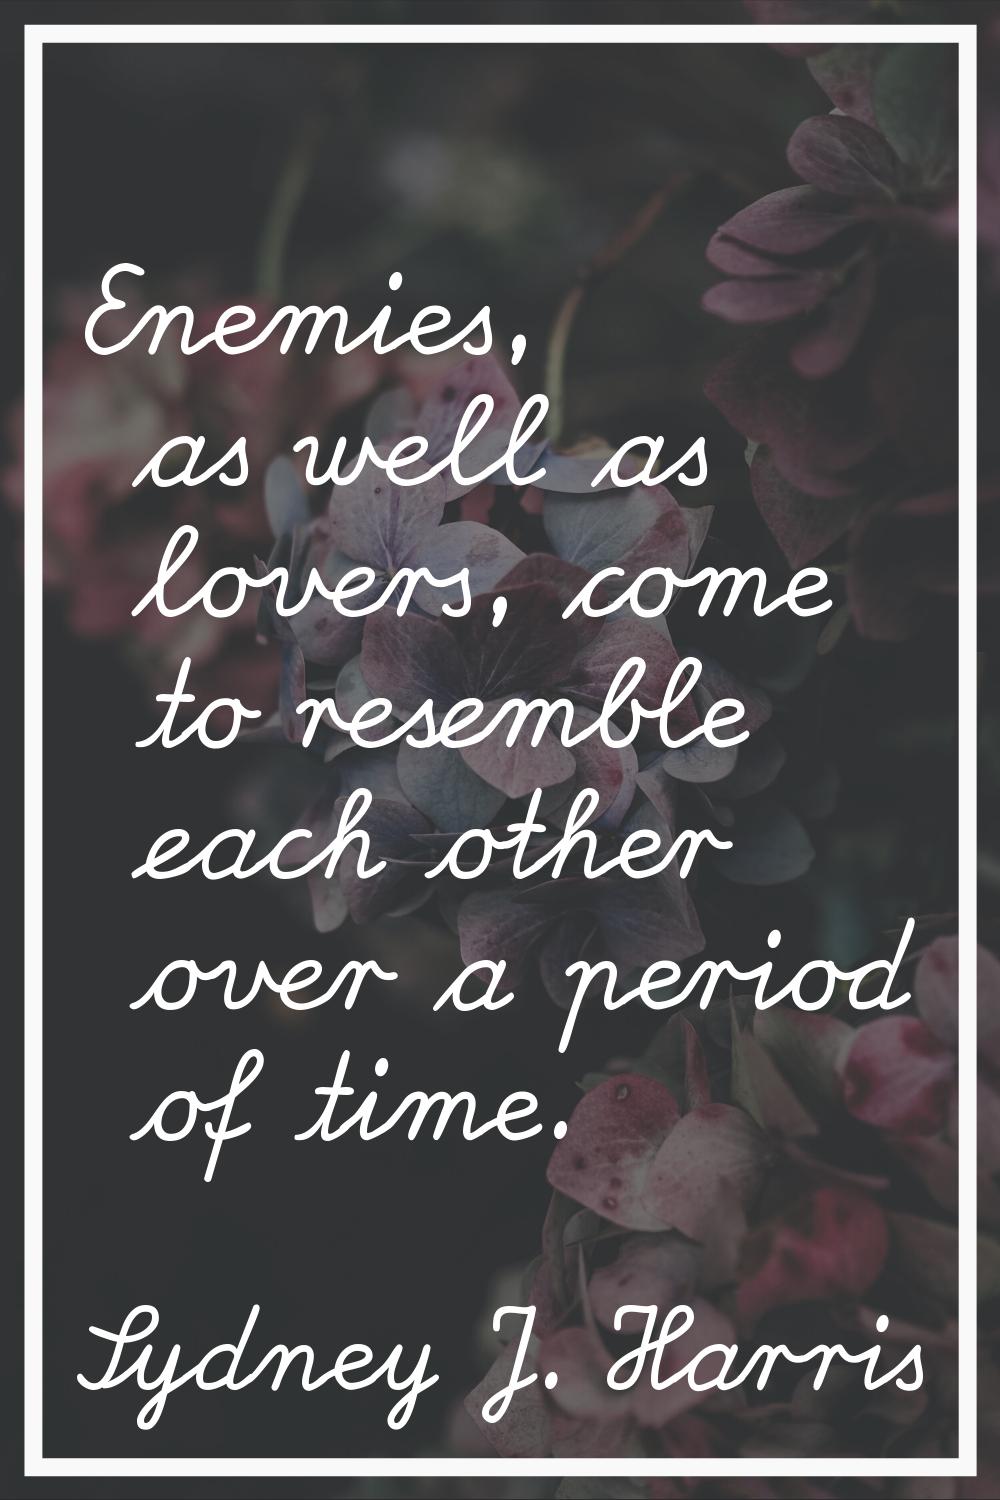 Enemies, as well as lovers, come to resemble each other over a period of time.